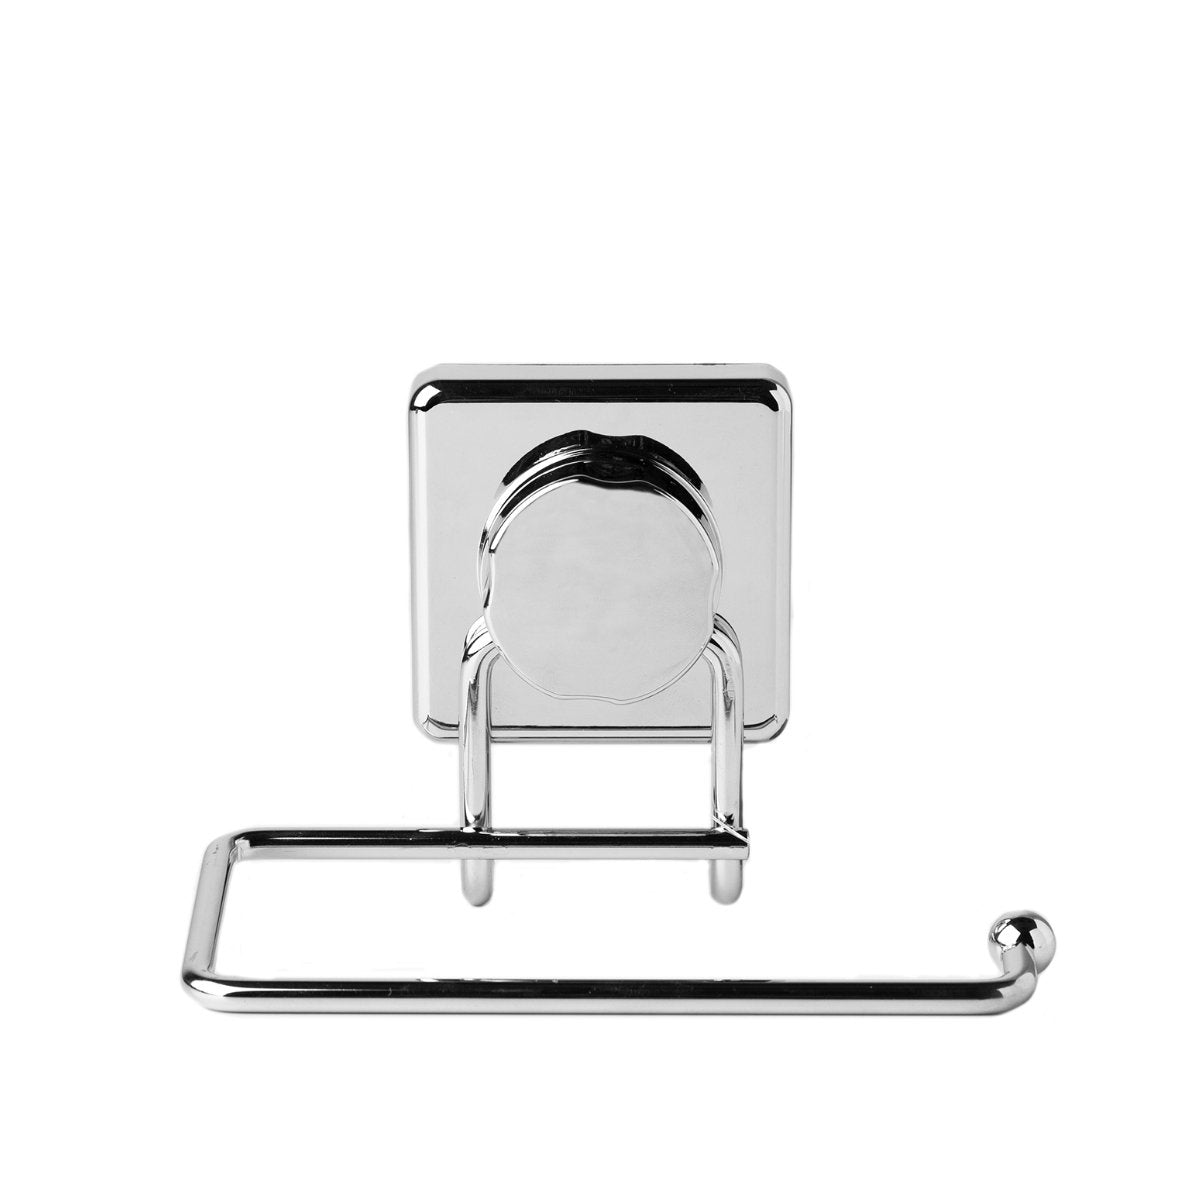 Suction and Screw Fix Chrome Toilet Roll Holder